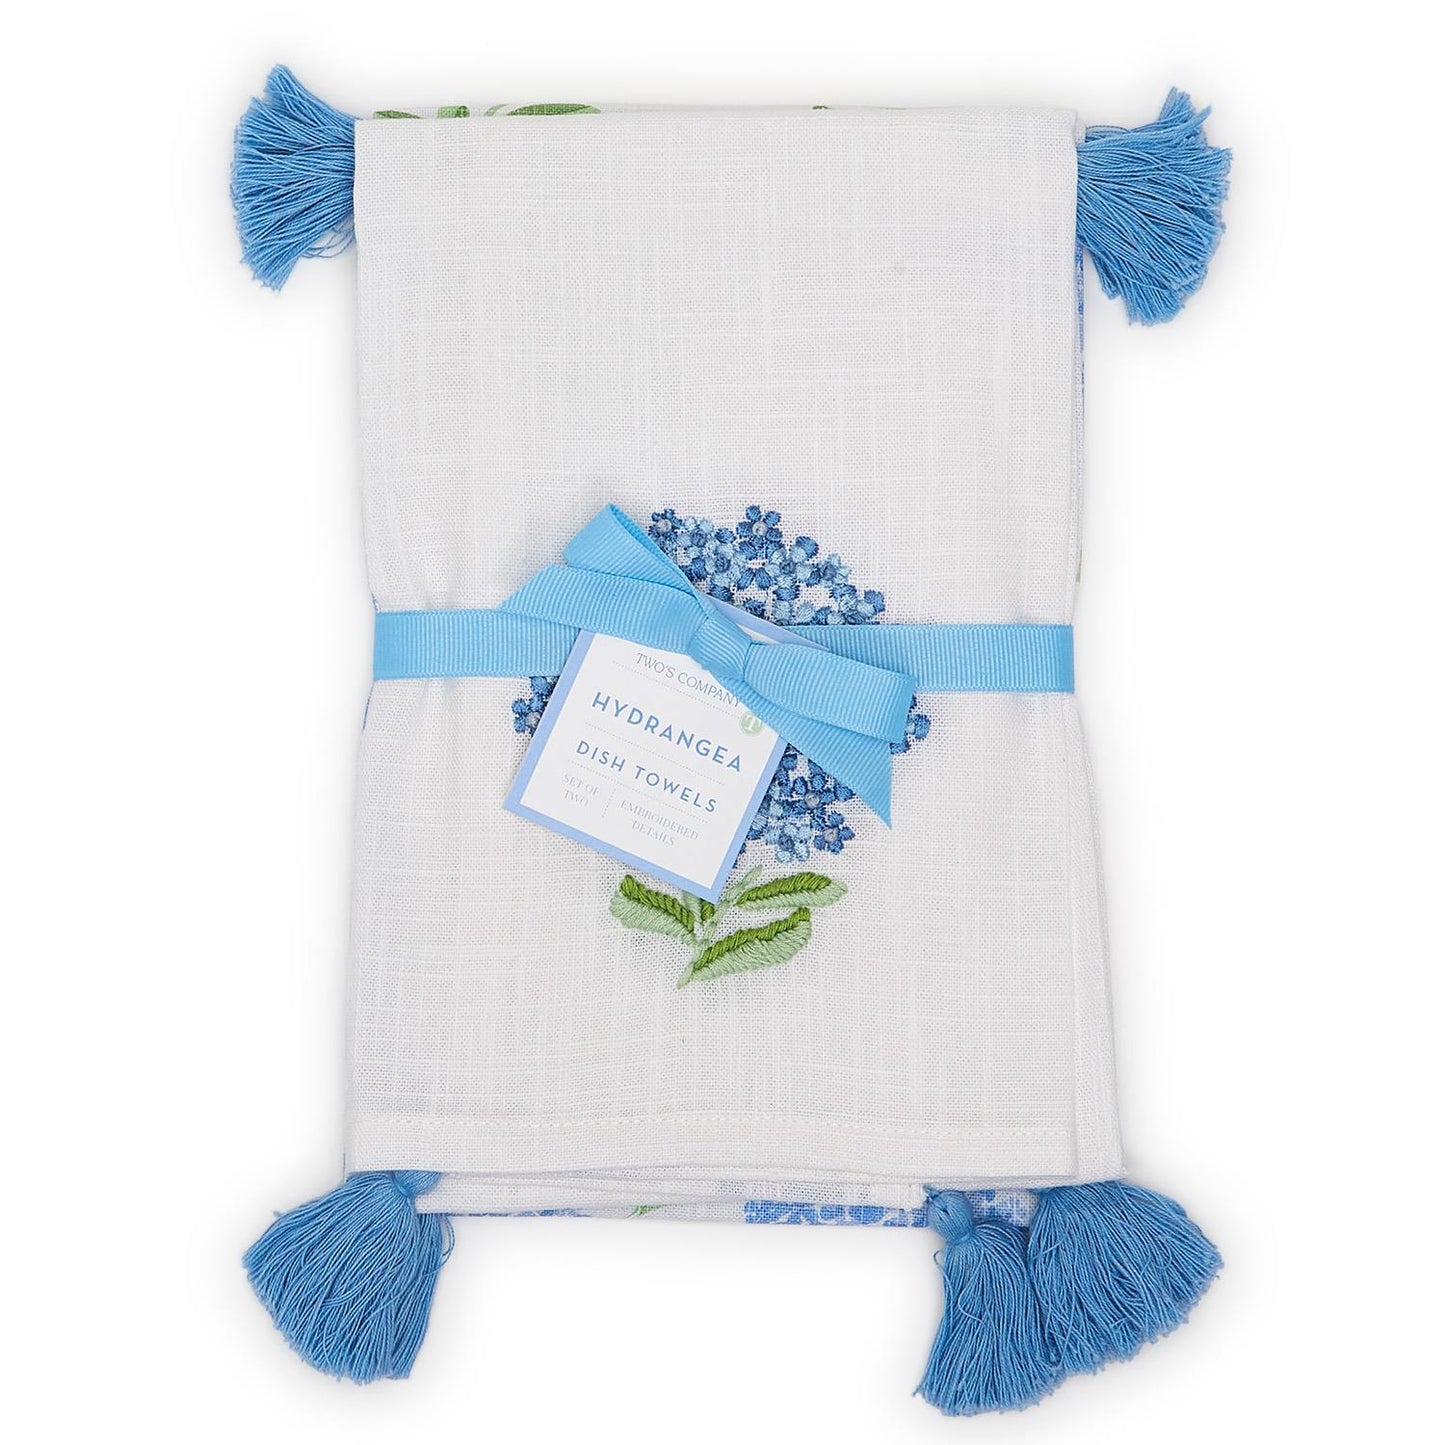 Two's Company Hydrangea Set Of 2 Dish Towels With Decorative Tassels - Cotton.